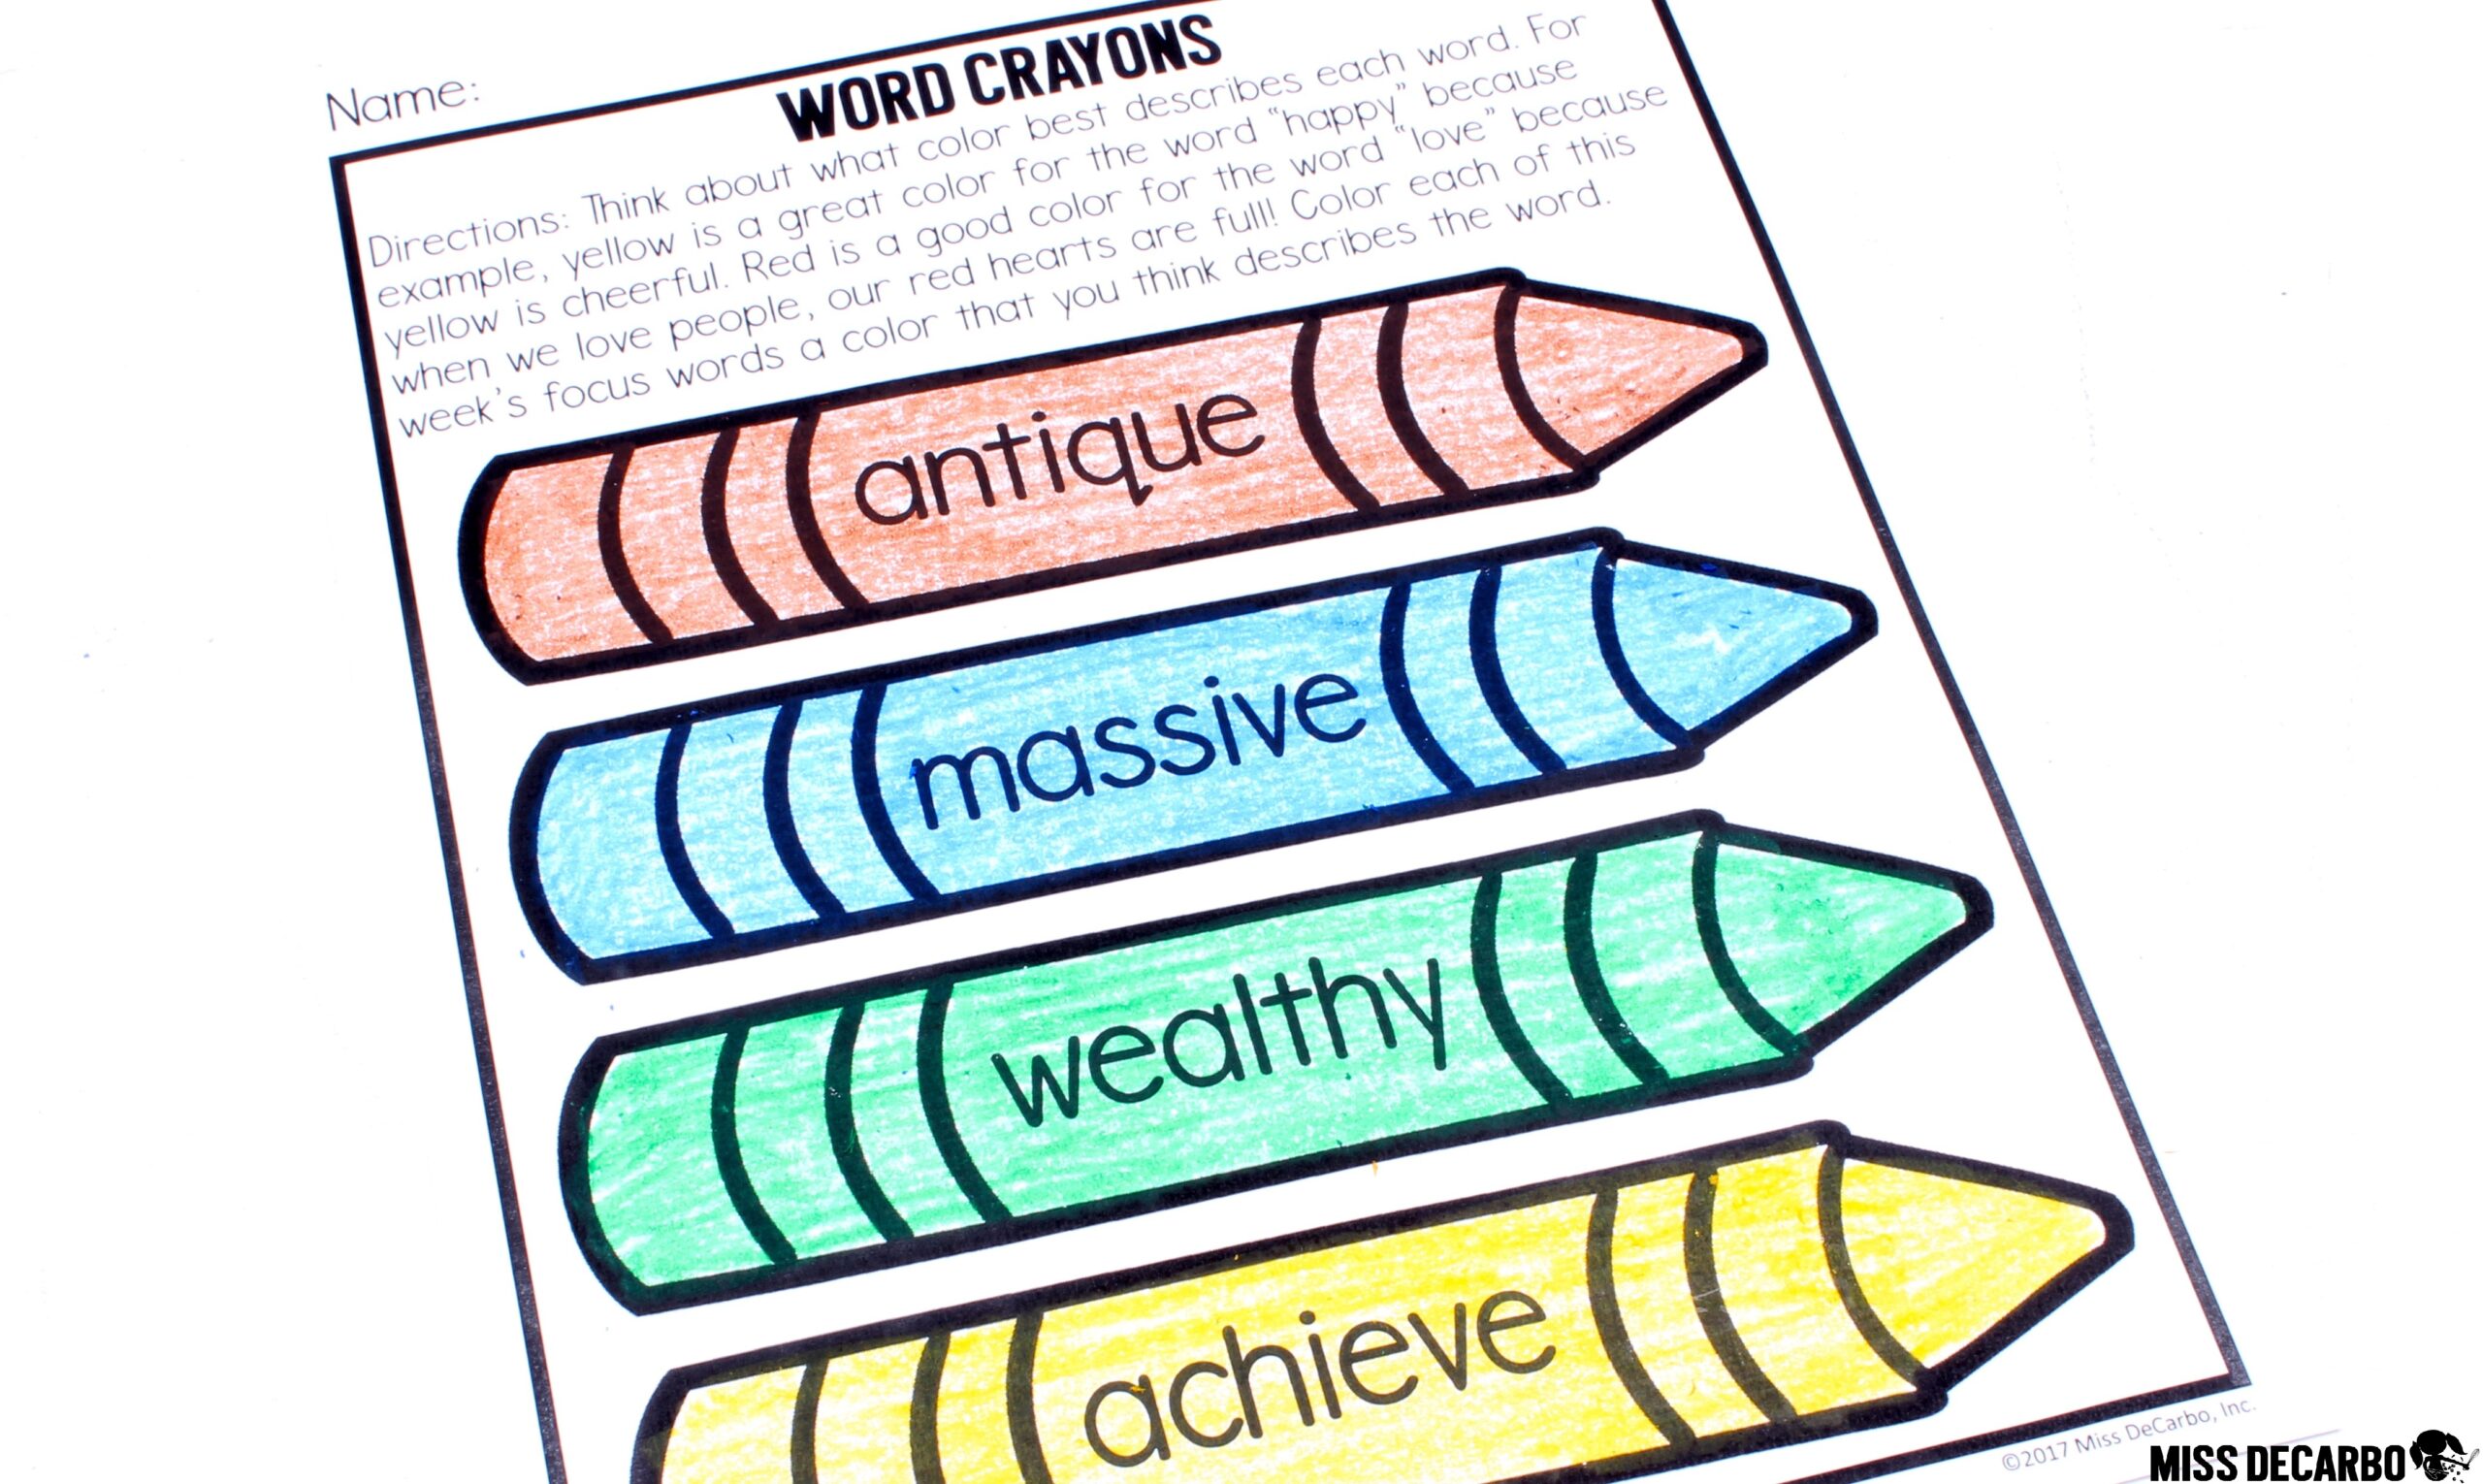 Vocabulary activity: Think about what color best describes each word's meaning. This activity gets students thinking critically about a word's meaning and its connection to their own lives. There are no right or wrong answers as long as the child can justify and explain his or her reasoning. Engaging vocabulary word play!